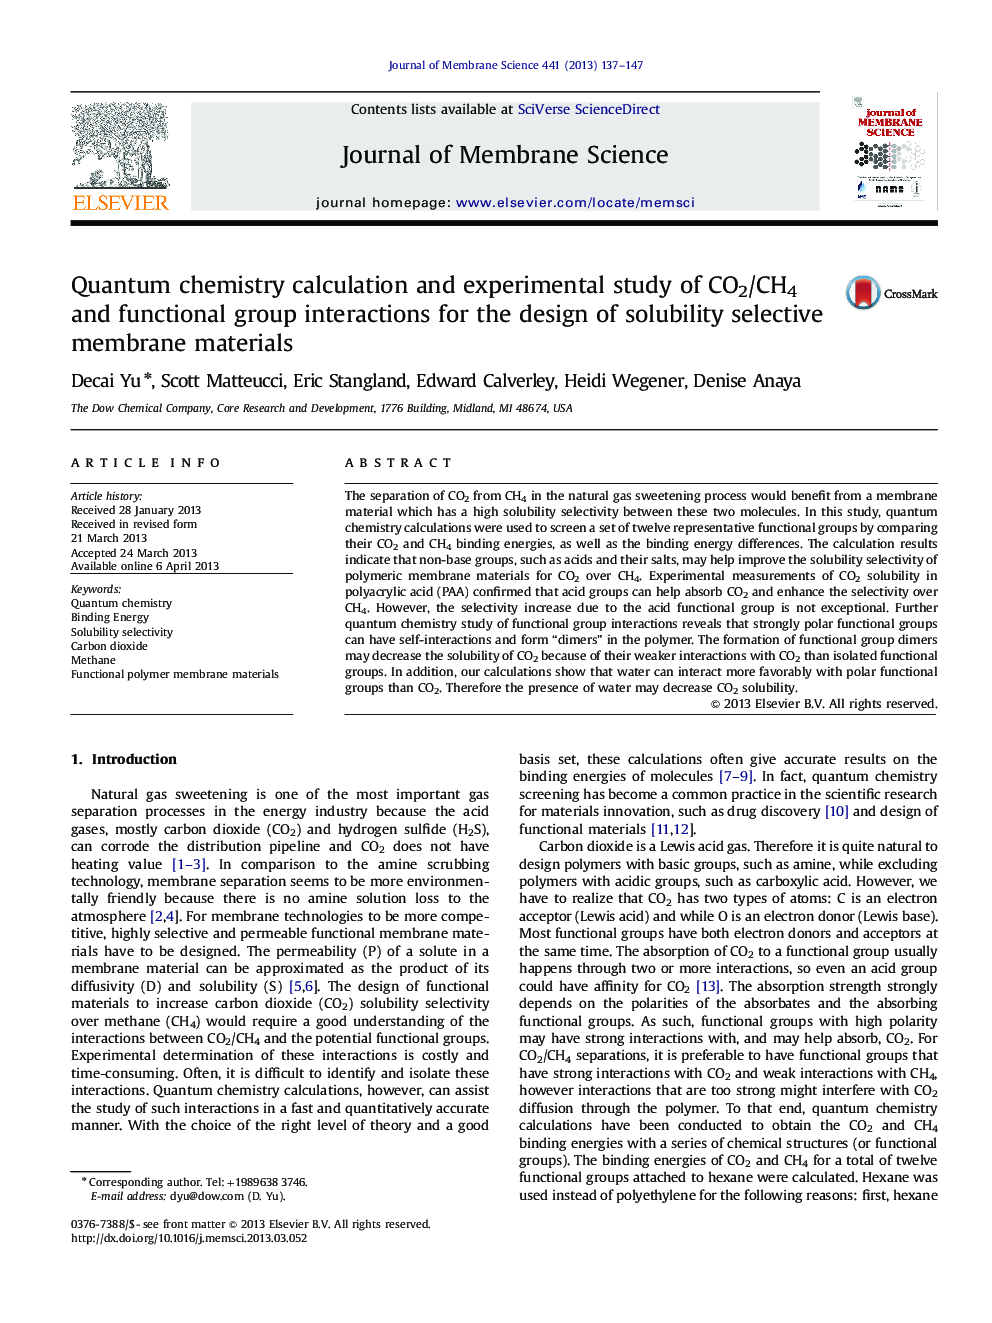 Quantum chemistry calculation and experimental study of CO2/CH4 and functional group interactions for the design of solubility selective membrane materials